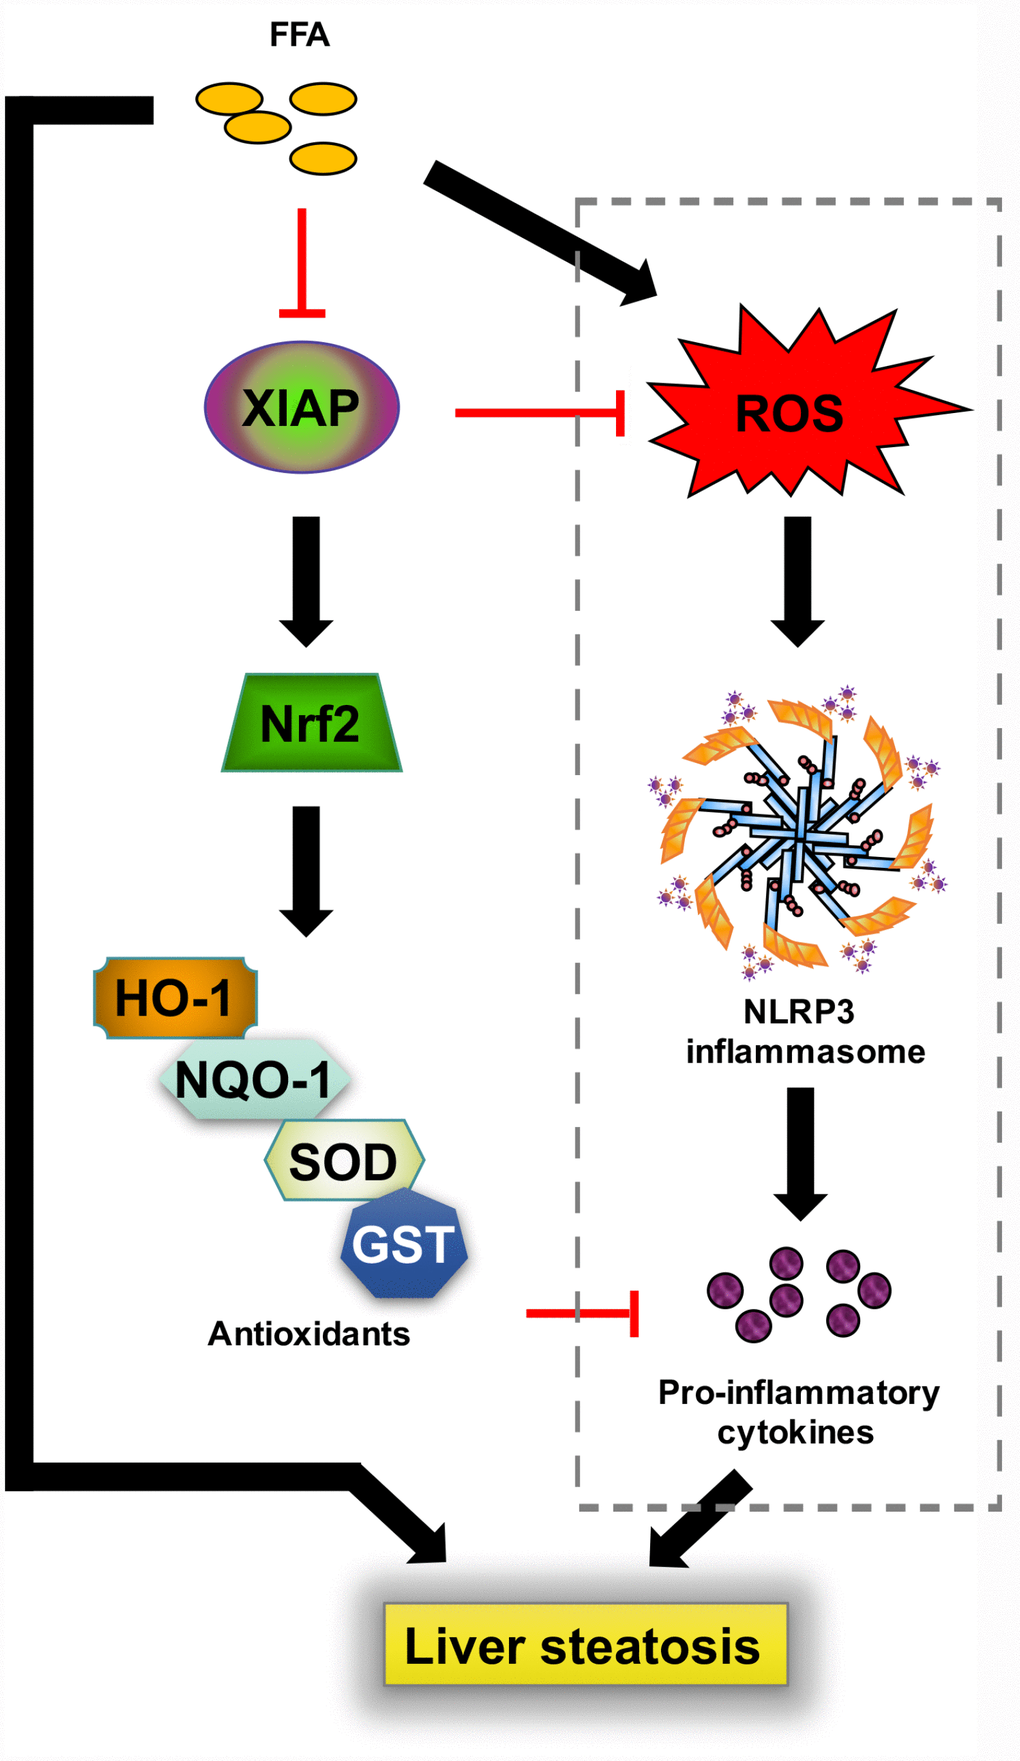 Schematic diagram depicting the role of XIAP in HFD-induced steatohepatitis. In response to a prolonged challenge with fat-rich diet ingestion, enhanced oxidative stress injury caused by circulatory free fatty acid promotes NLRP3 inflammasome mediated inflammation infiltration, followed by generation of down-stream pro-inflammatory cytokines, ultimately facilitates metabolic disorder associated lipid accumulation in liver. In contrast, activated XIAP and Nrf2 activity are associated with decreased oxidative stress. Circulatory free fatty acid may suppress XIAP expression, further reduce Nrf2 pathway activation. Up-regulation of XIAP may act as the upstream to inhibit ROS generation and induce Nrf2 and other antioxidants activity. In addition, elevated Nrf2 activity and down-stream anti-oxidants including HO-1, NQO-1, SOD or GST further inhibit inflammatory response, finally relieve lipid deposition in liver and hepatic inflammation.